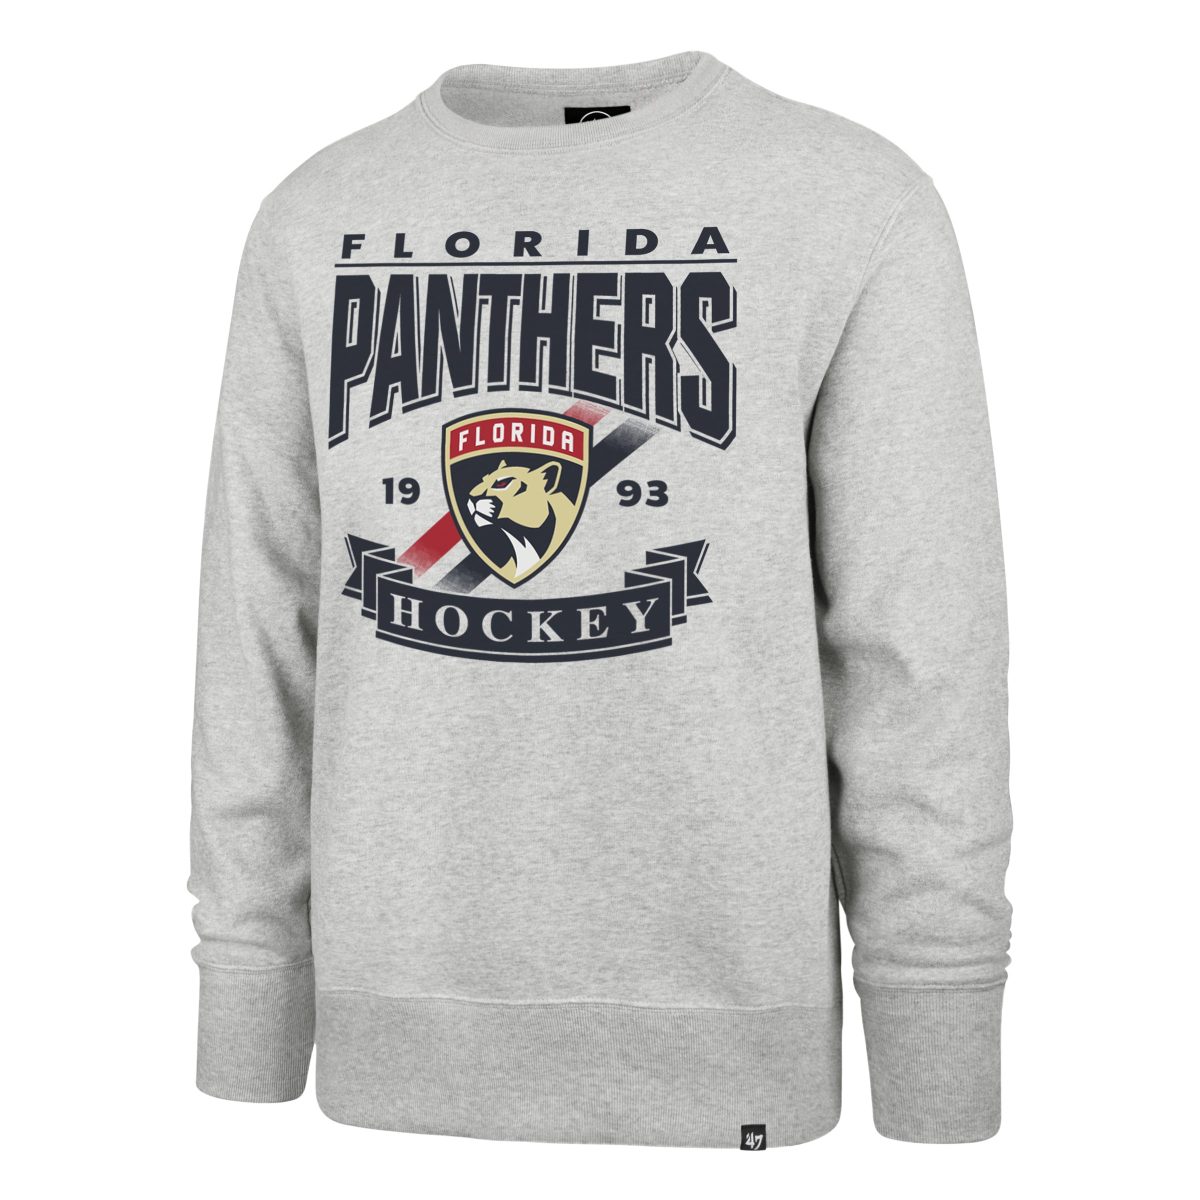 https://www.malbongol.shop/wp-content/uploads/1702/77/only-45-00-usd-for-florida-panthers-crossroad-47-headline-crew-online-at-the-shop_0-1200x1200.jpg